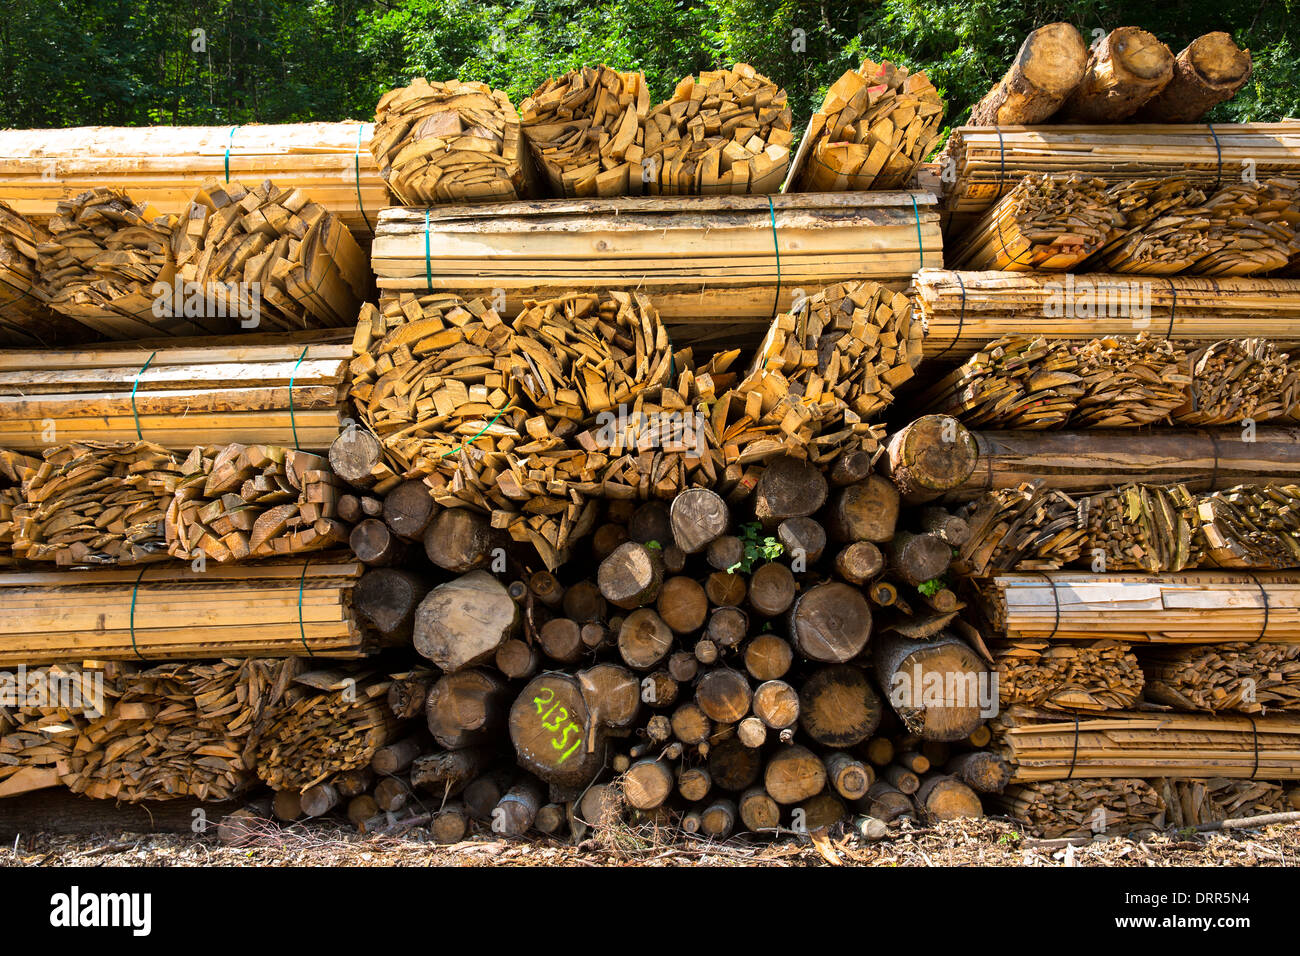 Timber planks and logs stacked to become seasoned wood at Interlaken in the Bernese Oberland, Switzerland Stock Photo